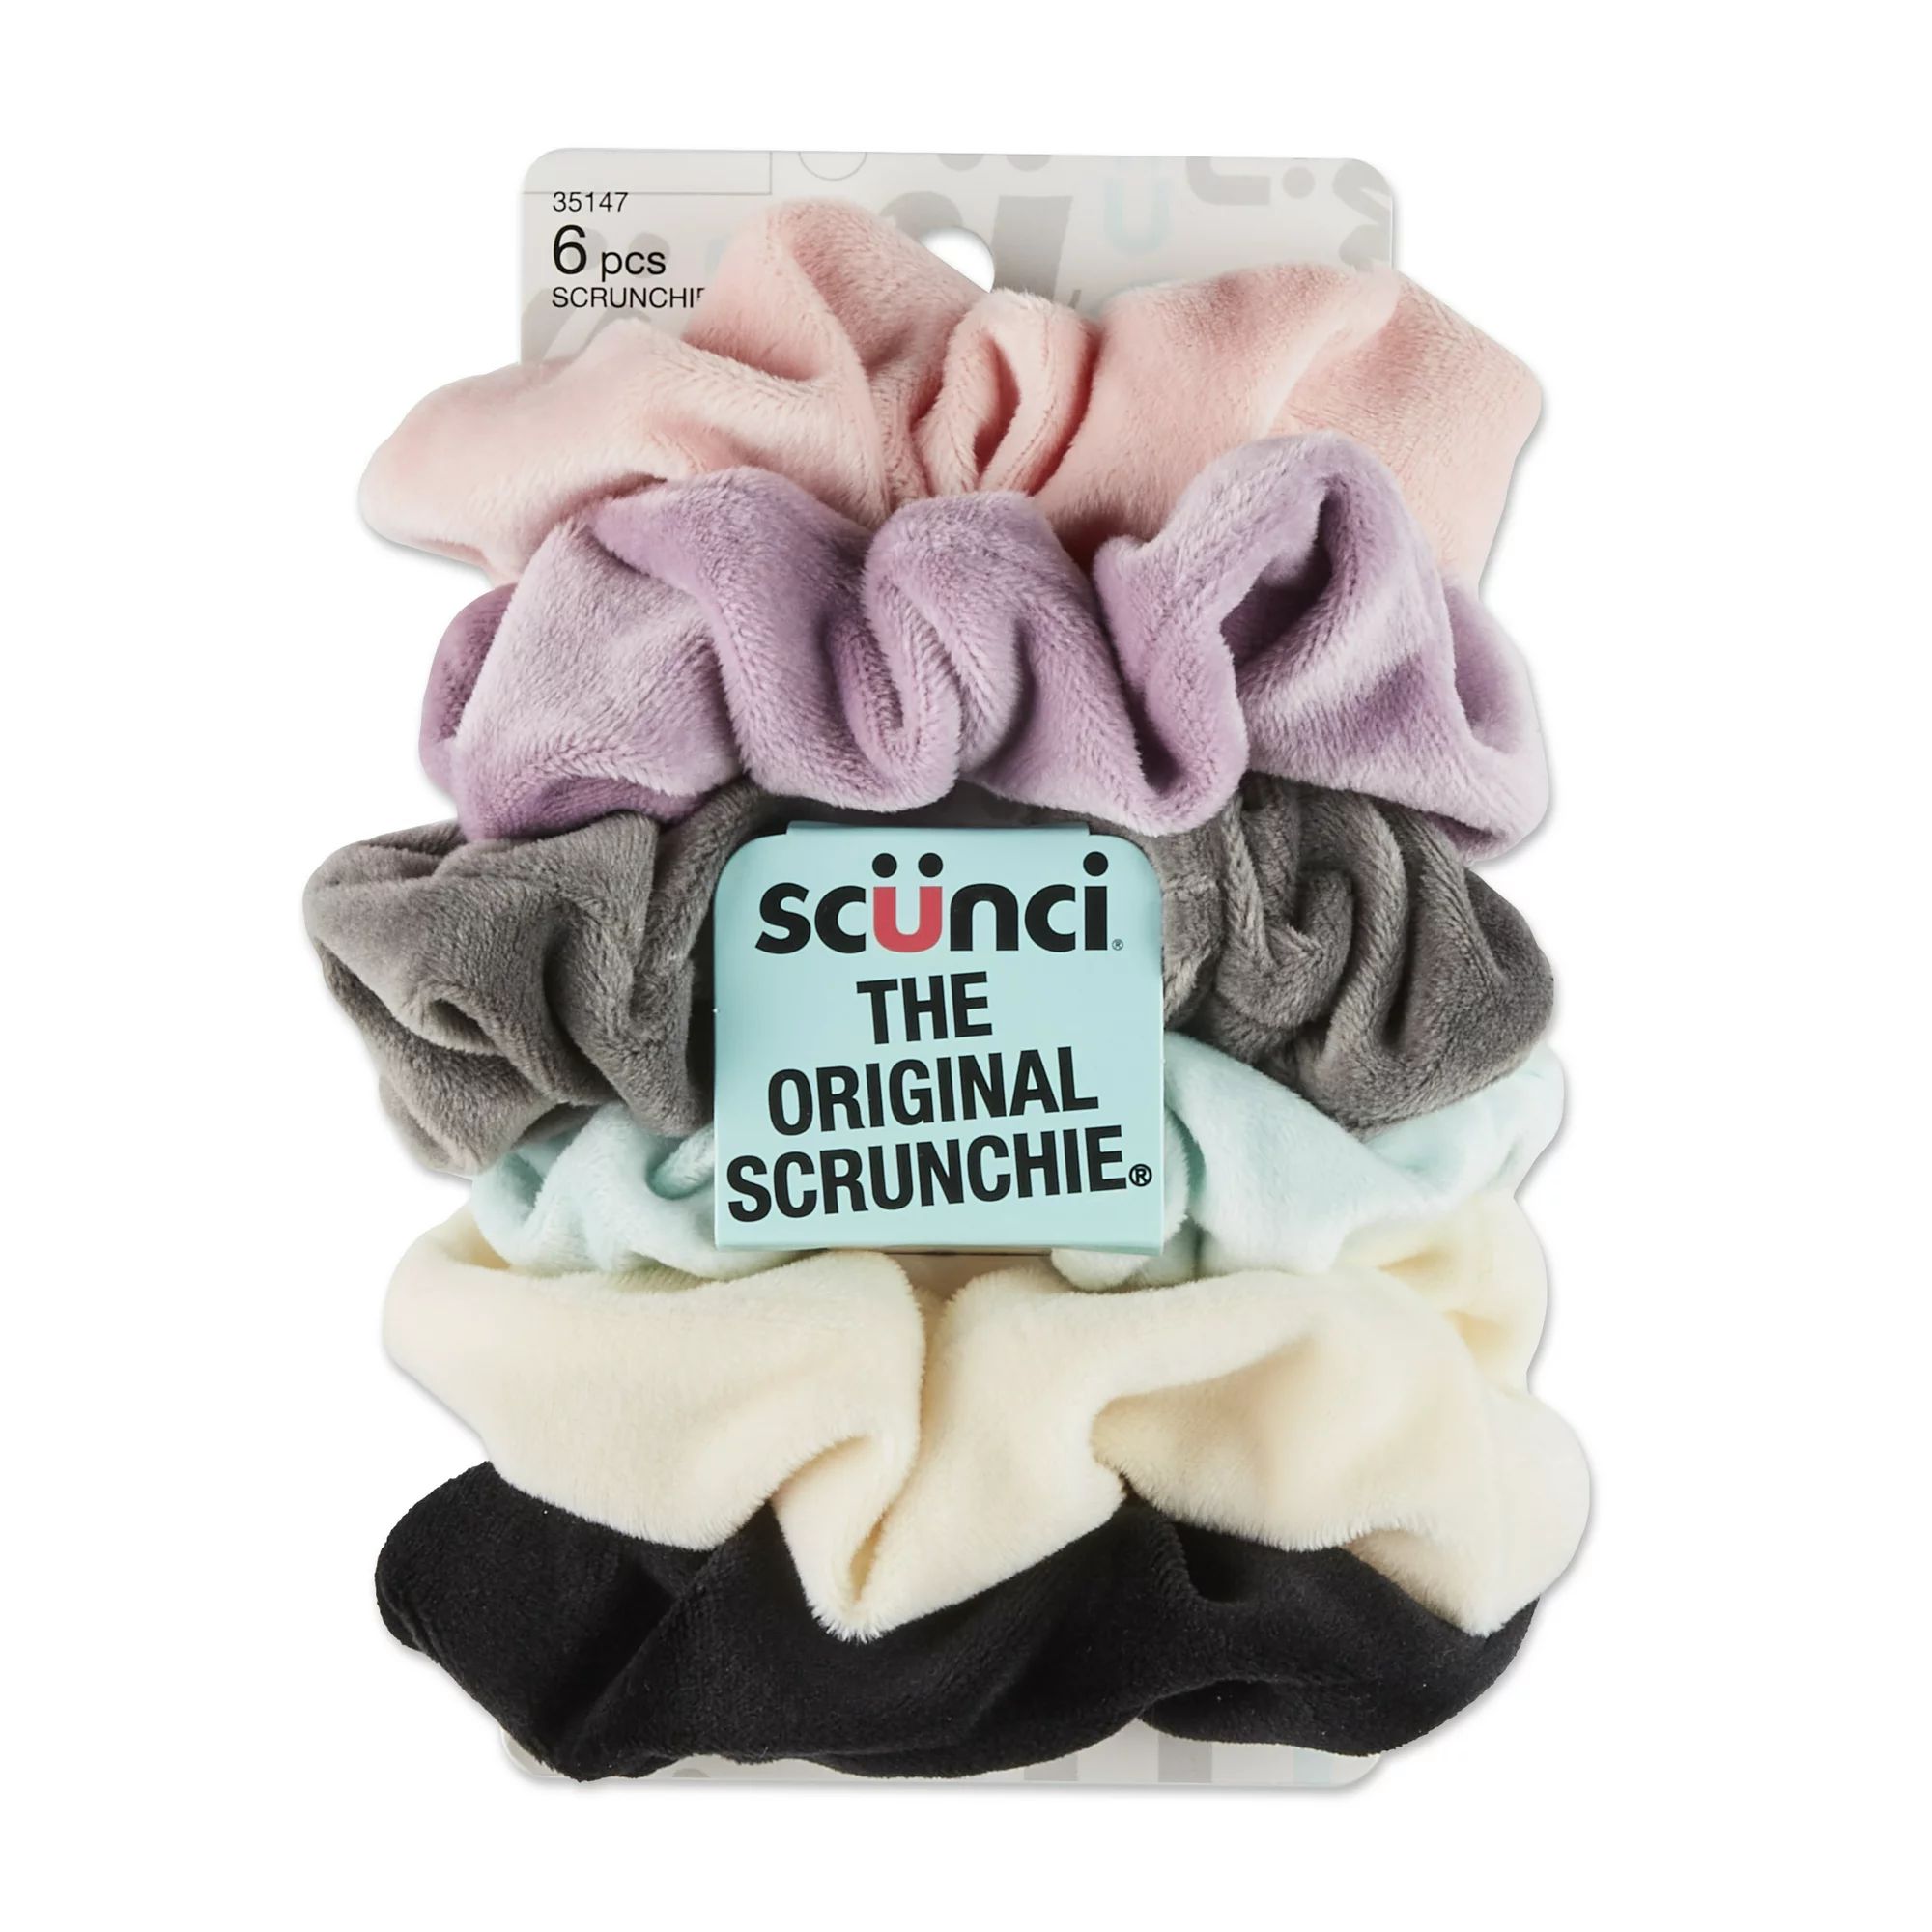 Scunci The Original Scrunchie Hair Ties in Soft Velour, Assorted Pastels and Black, 6 Ct | Walmart (US)